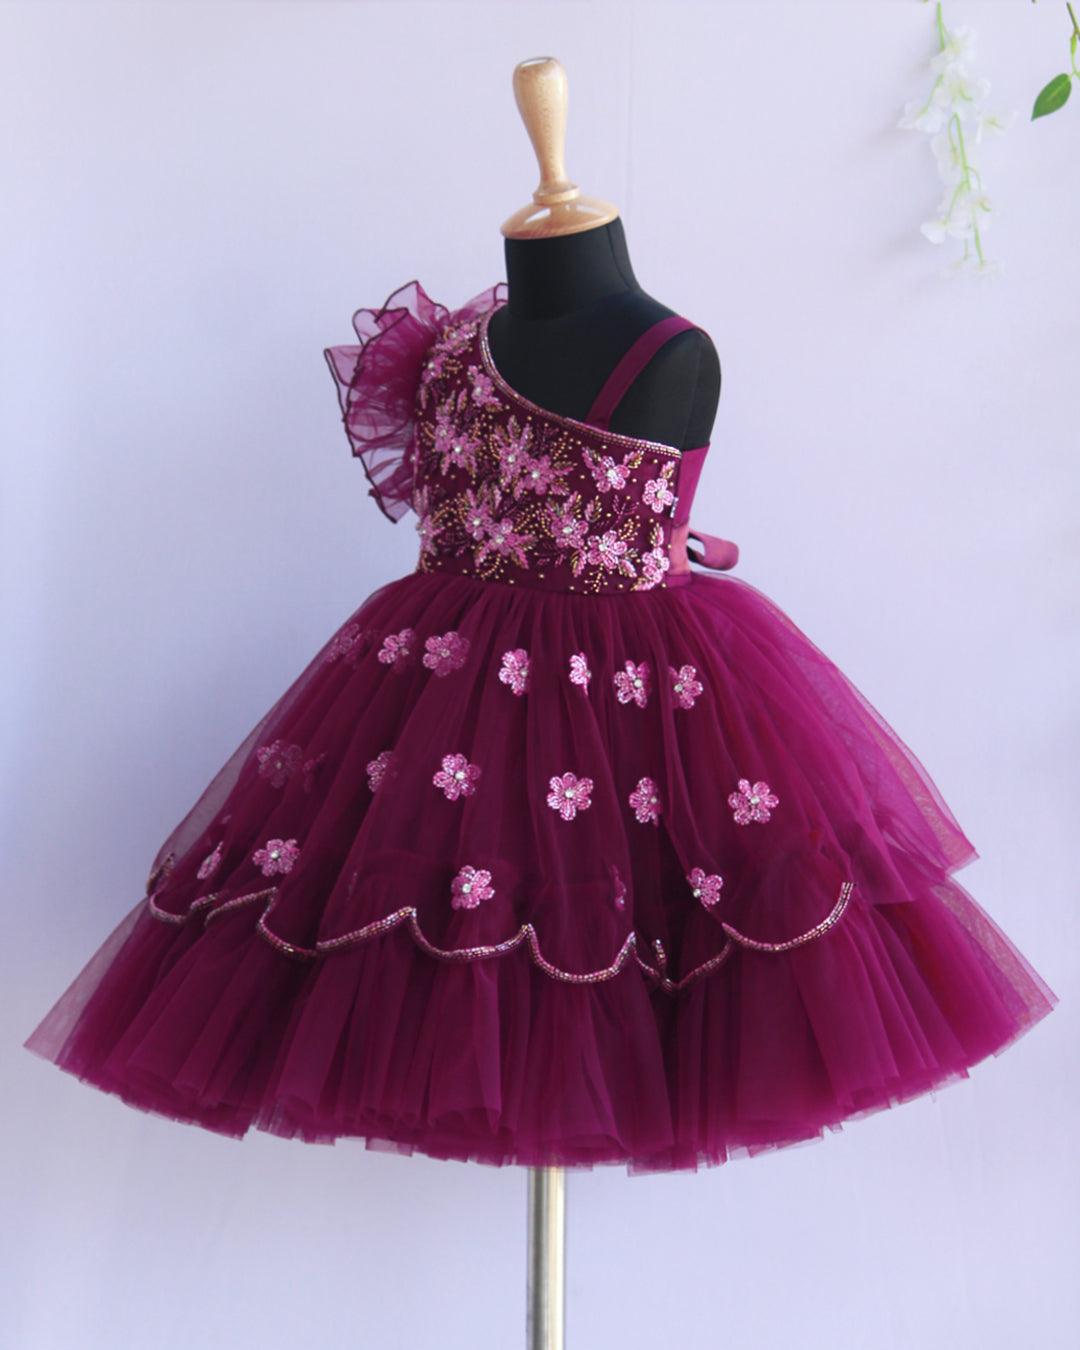 Purple Vine Shade Heavy Birthday Handwork Frock
Material: Purple vine colour Heavy party wear handwork frock. in the yoke portion pink and golden colour heavy cutbead handwork is done. skirt part is highlighted w